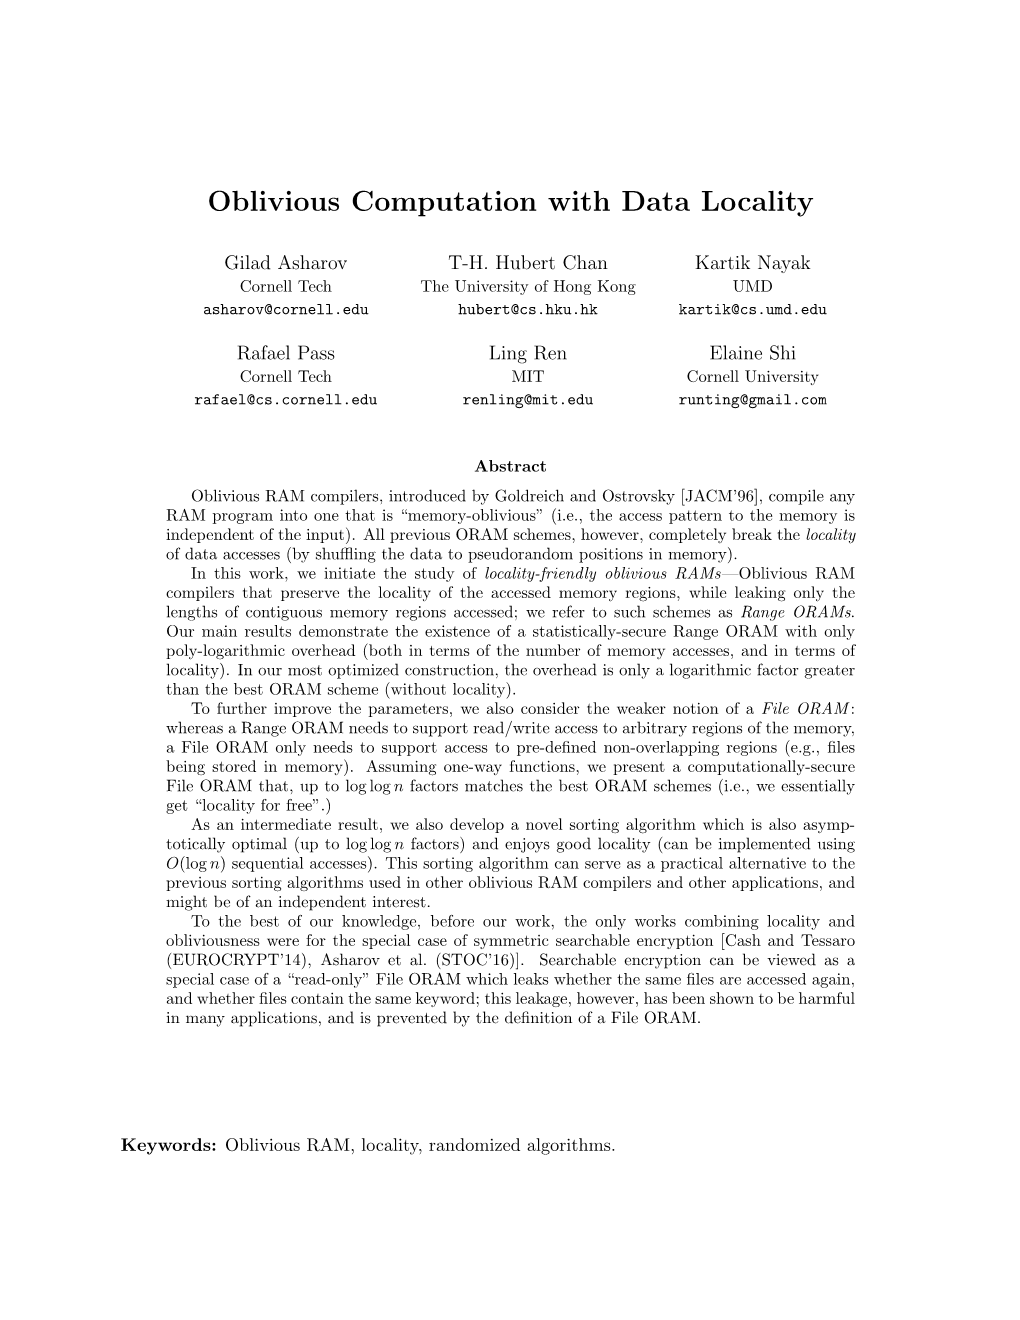 Oblivious Computation with Data Locality